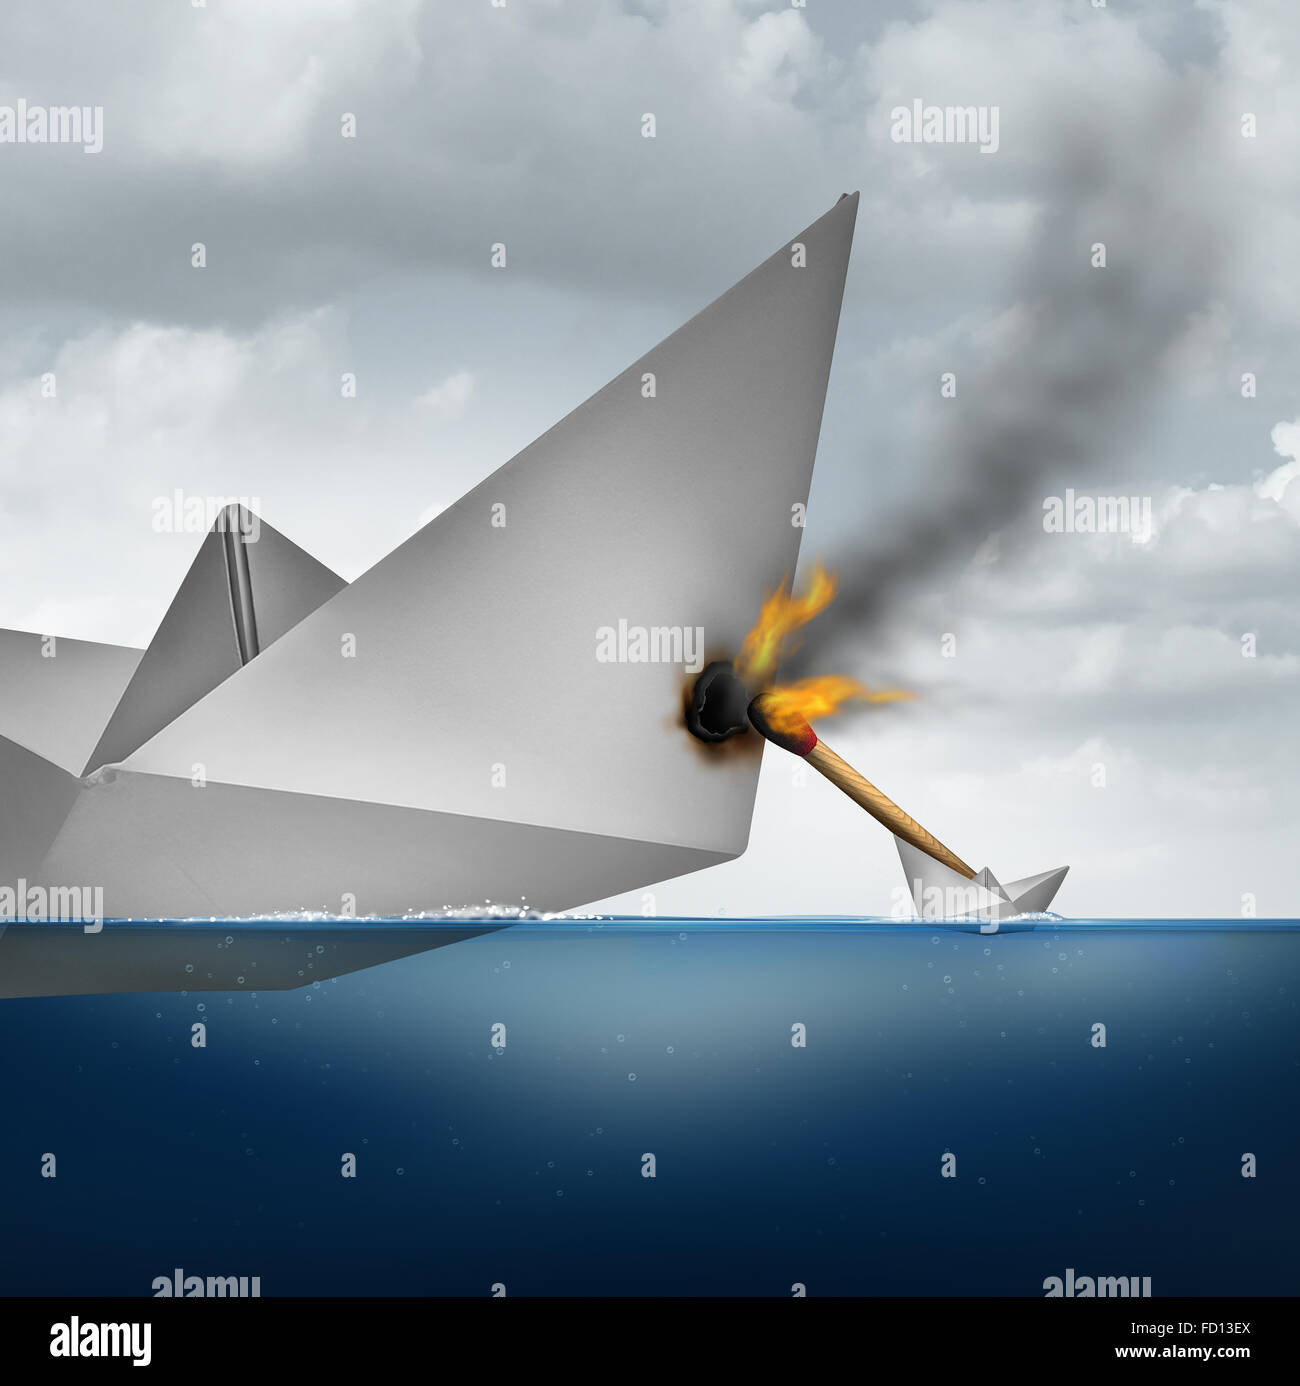 Small business strategy concept and vulnerable big corporation with a huge paper boat being attacked by a small vessel with a burning match causing damage to the larger competitor as a metaphor for corporate vulnerability. Stock Photo